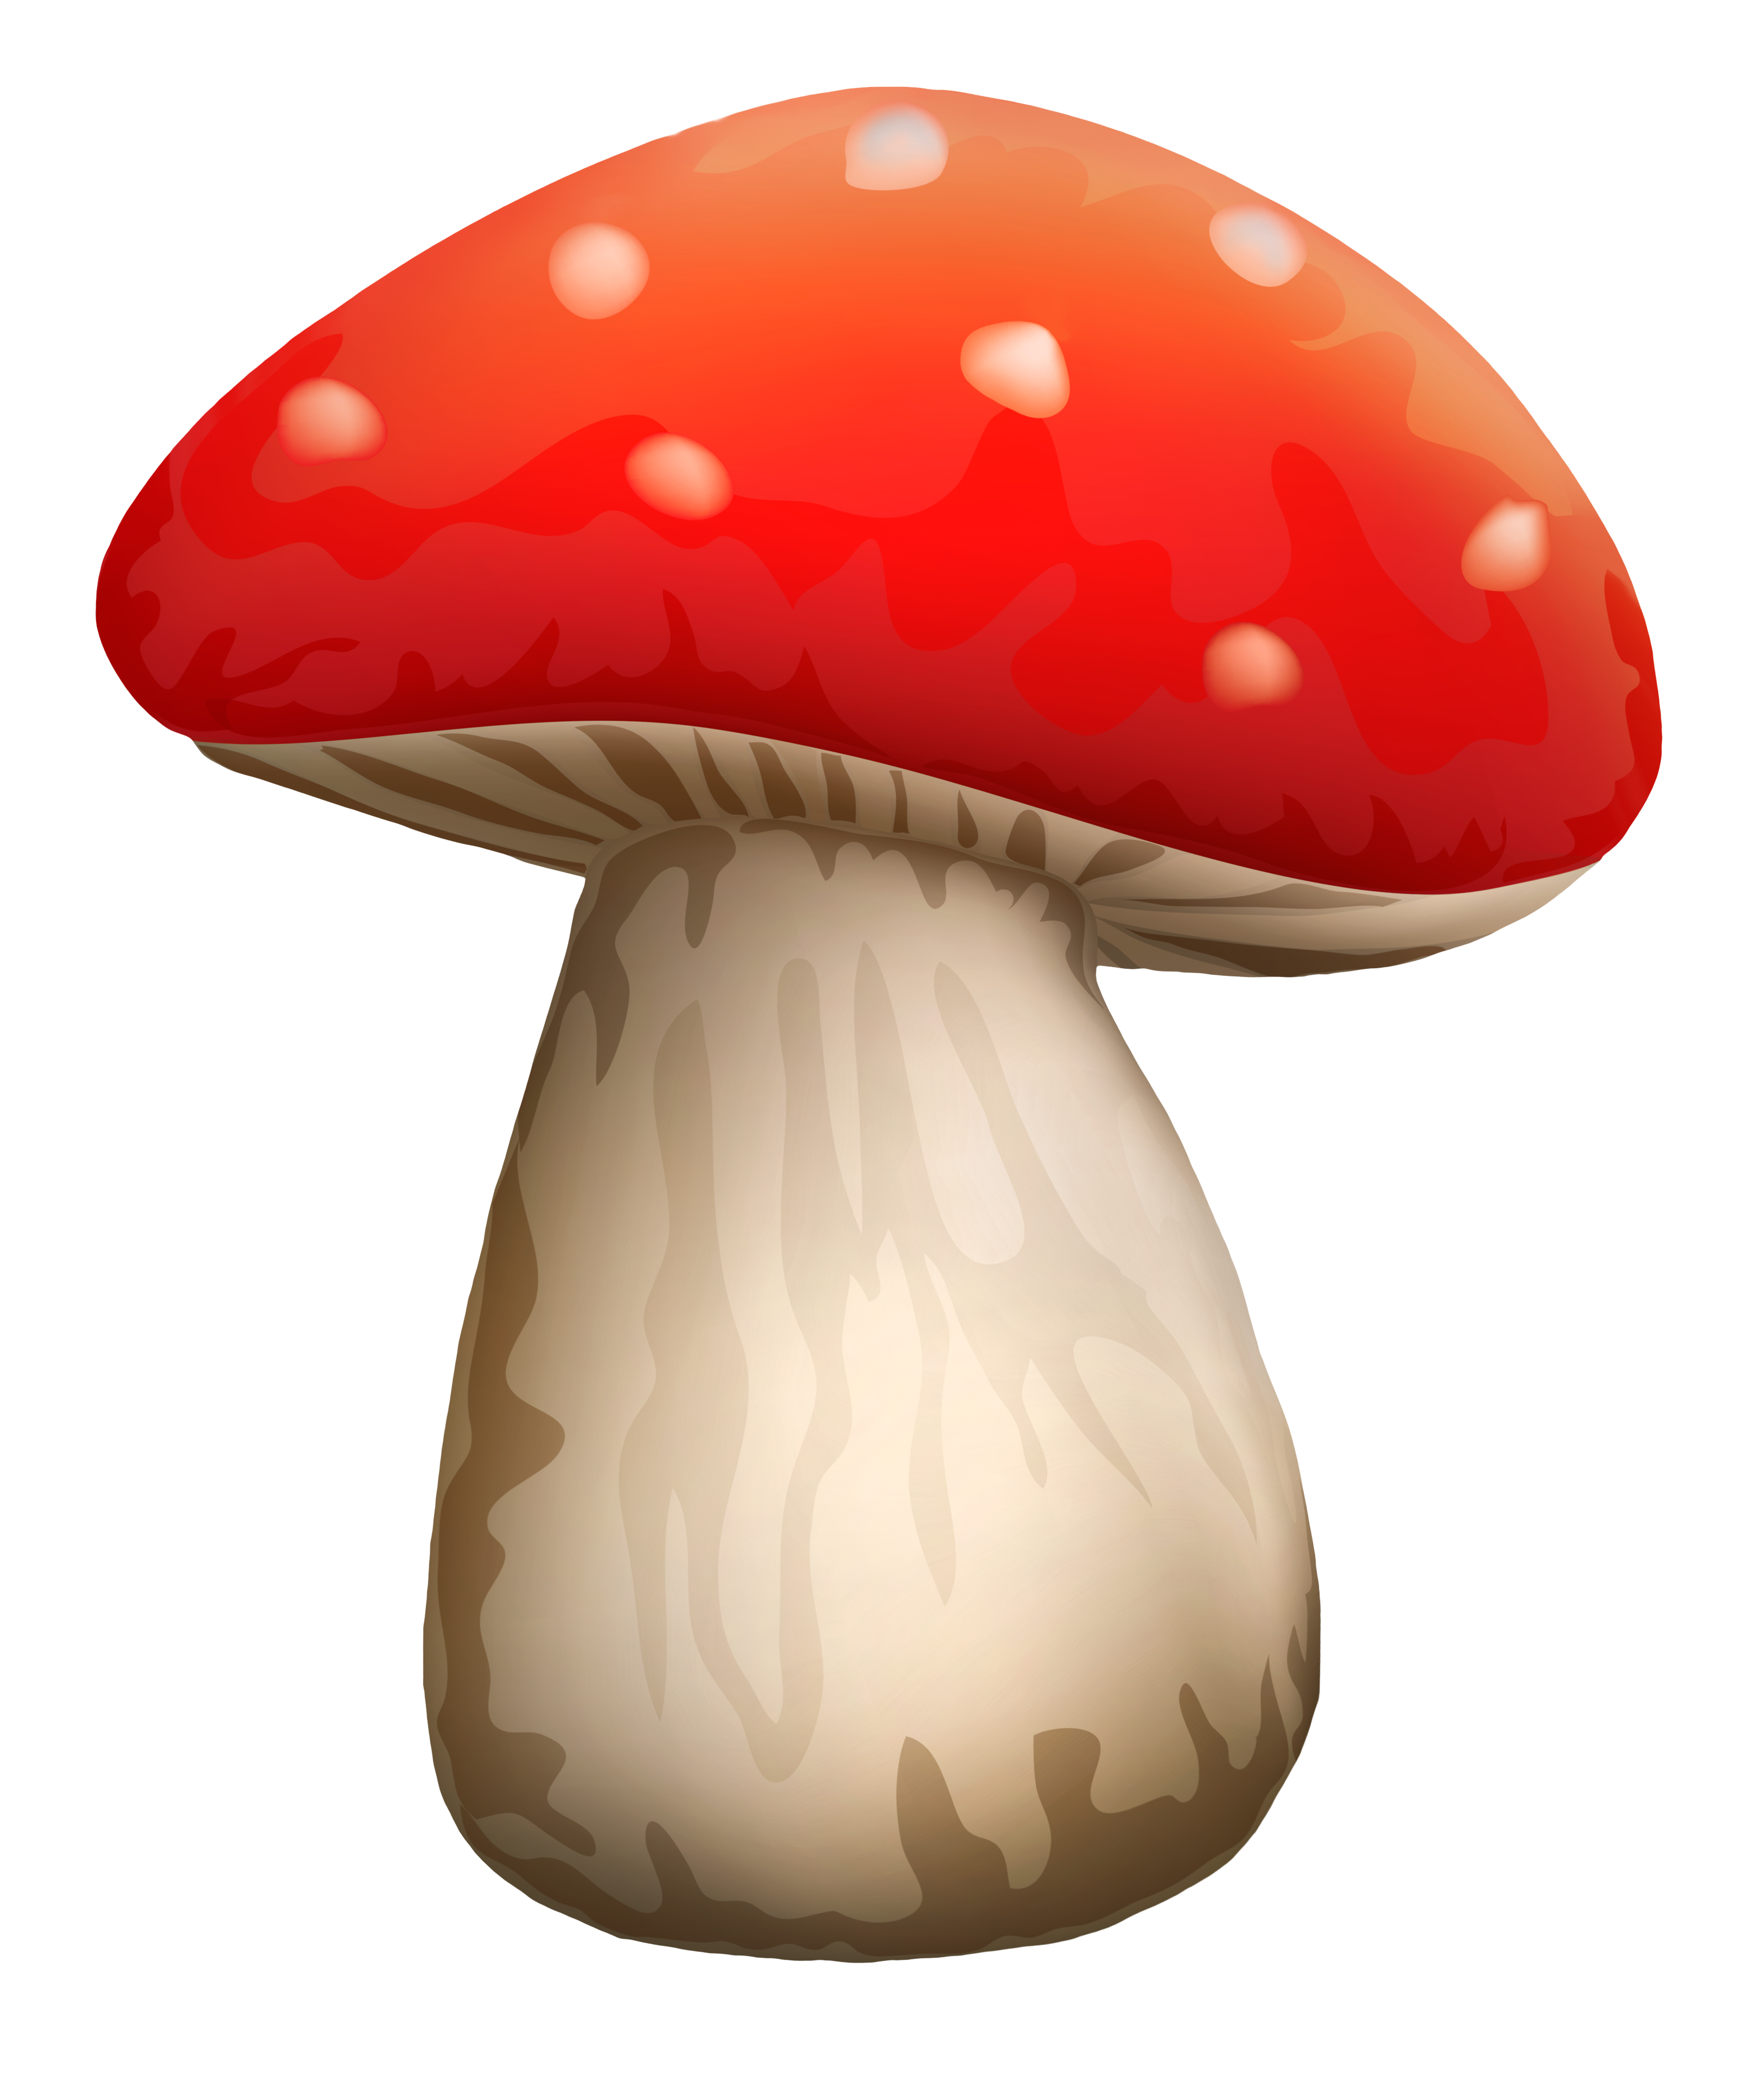 Poisonous Red Mushroom With White Dots PNG Clipart - Best WEB Clipart